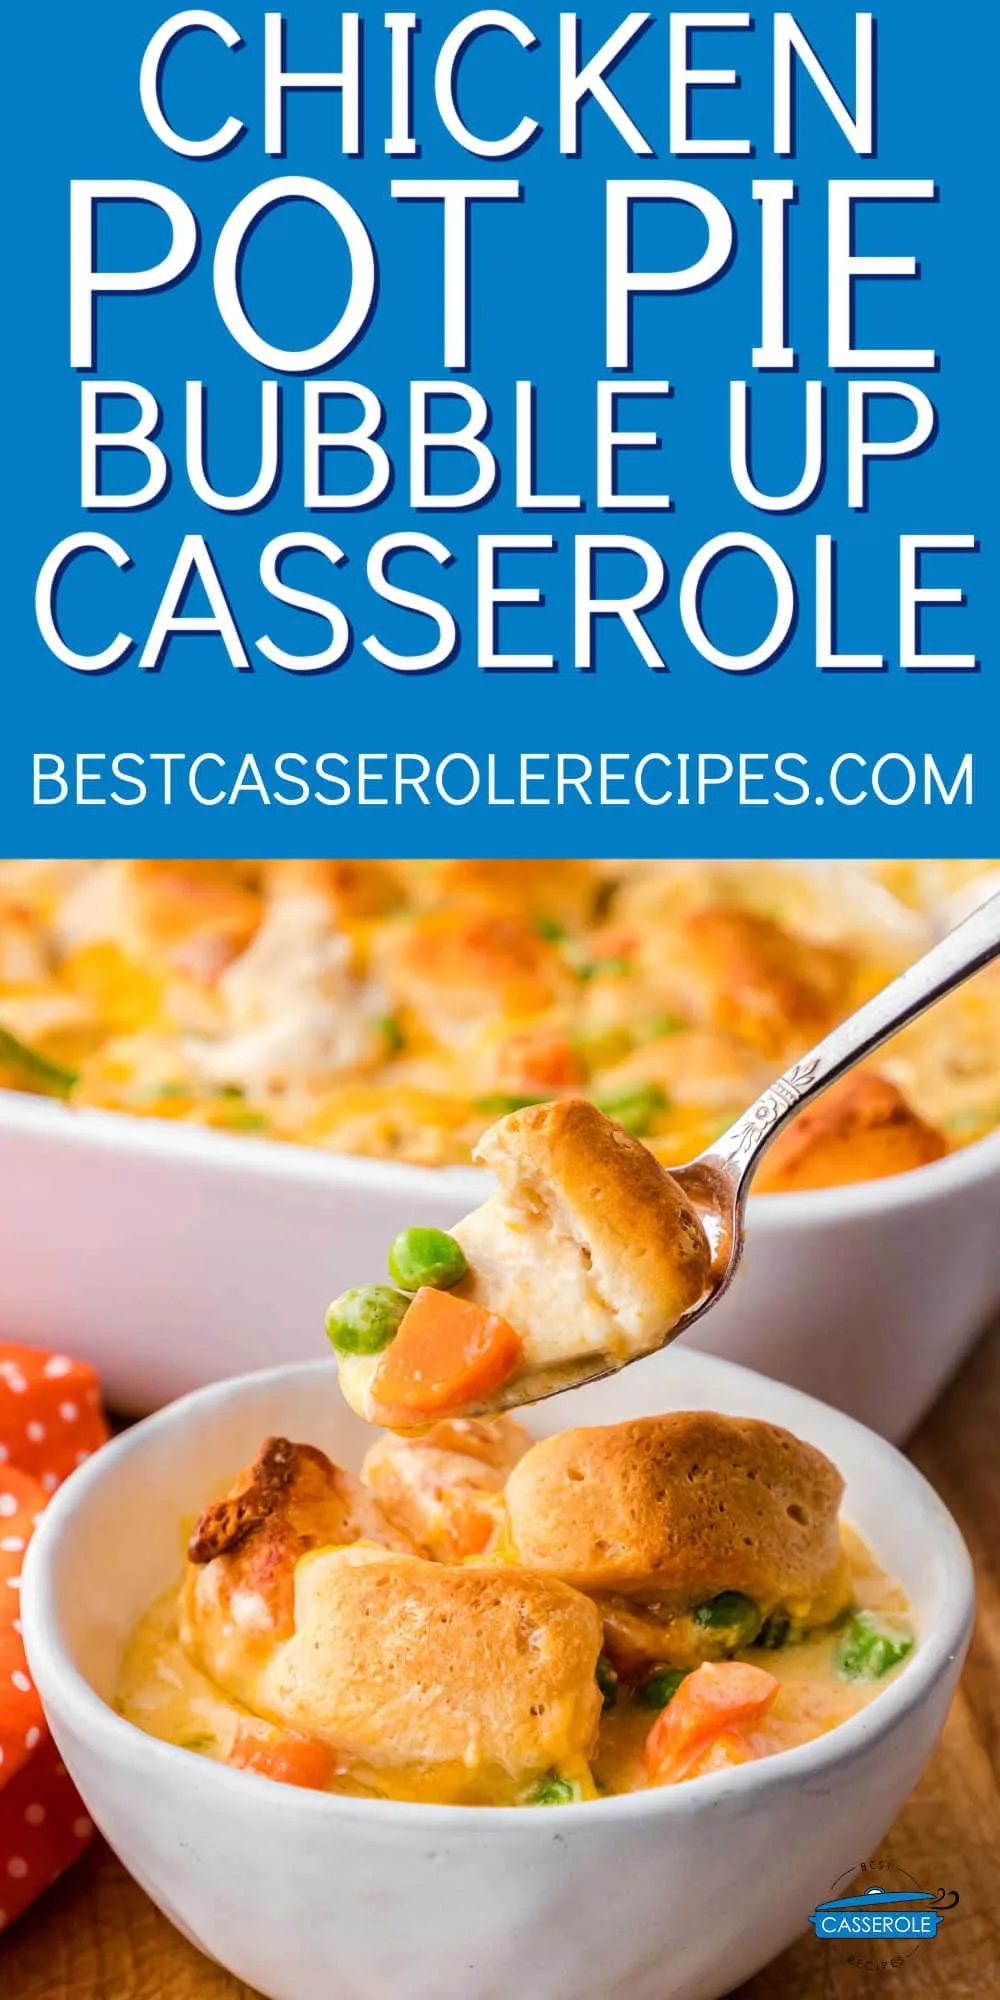 spoon of casserole with a blue banner and text